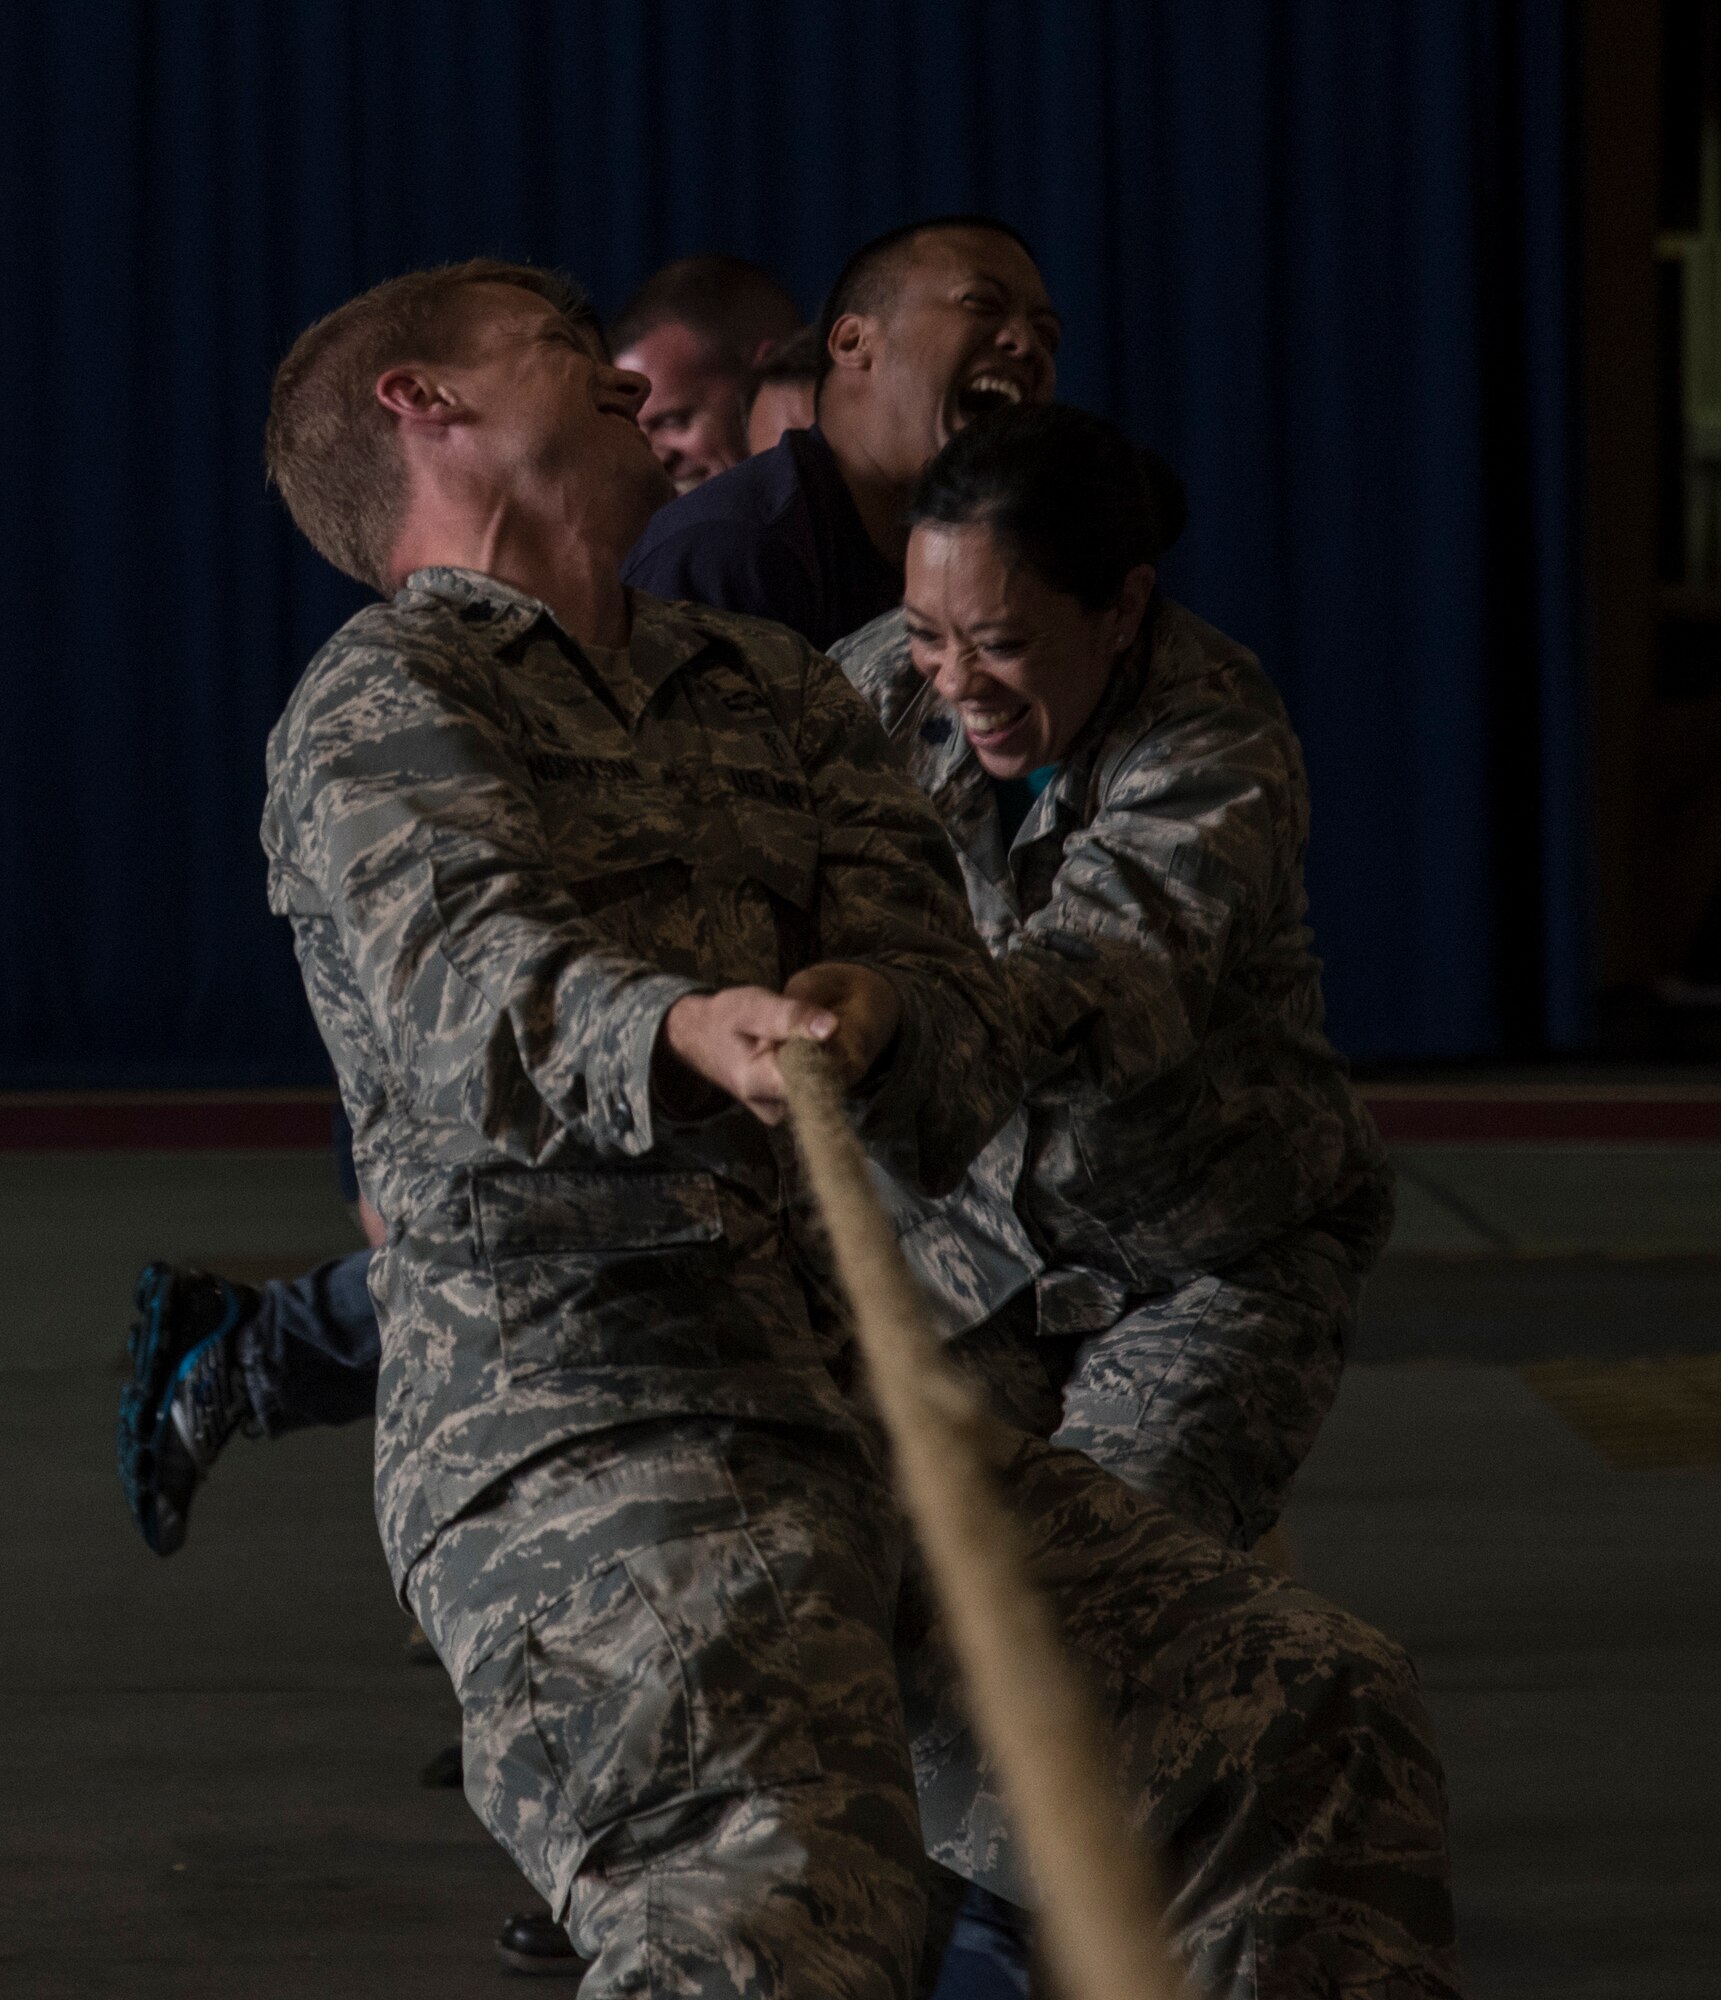 The 35th Fighter Wing leadership participates in a tug-o-war challenge during the first Team Misawa Resilient Relationships and Appreciation Day, at Misawa Air Base, Japan, Aug. 18, 2017. The event, hosted by the 35th Fighter Wing Chapel Corps, afforded personnel an opportunity to see their squadron leaders participate in a resiliency challenge as they closed out the day leading by example. According to Air Force assessments on Airmen, ensuring all personnel exercise mental, physical, social and spiritual activities in their life, in and out of work, leads to a well-performing, mission ready Airmen who can better execute tasks. (U.S. Air Force photo by Senior Airman Sadie Colbert)